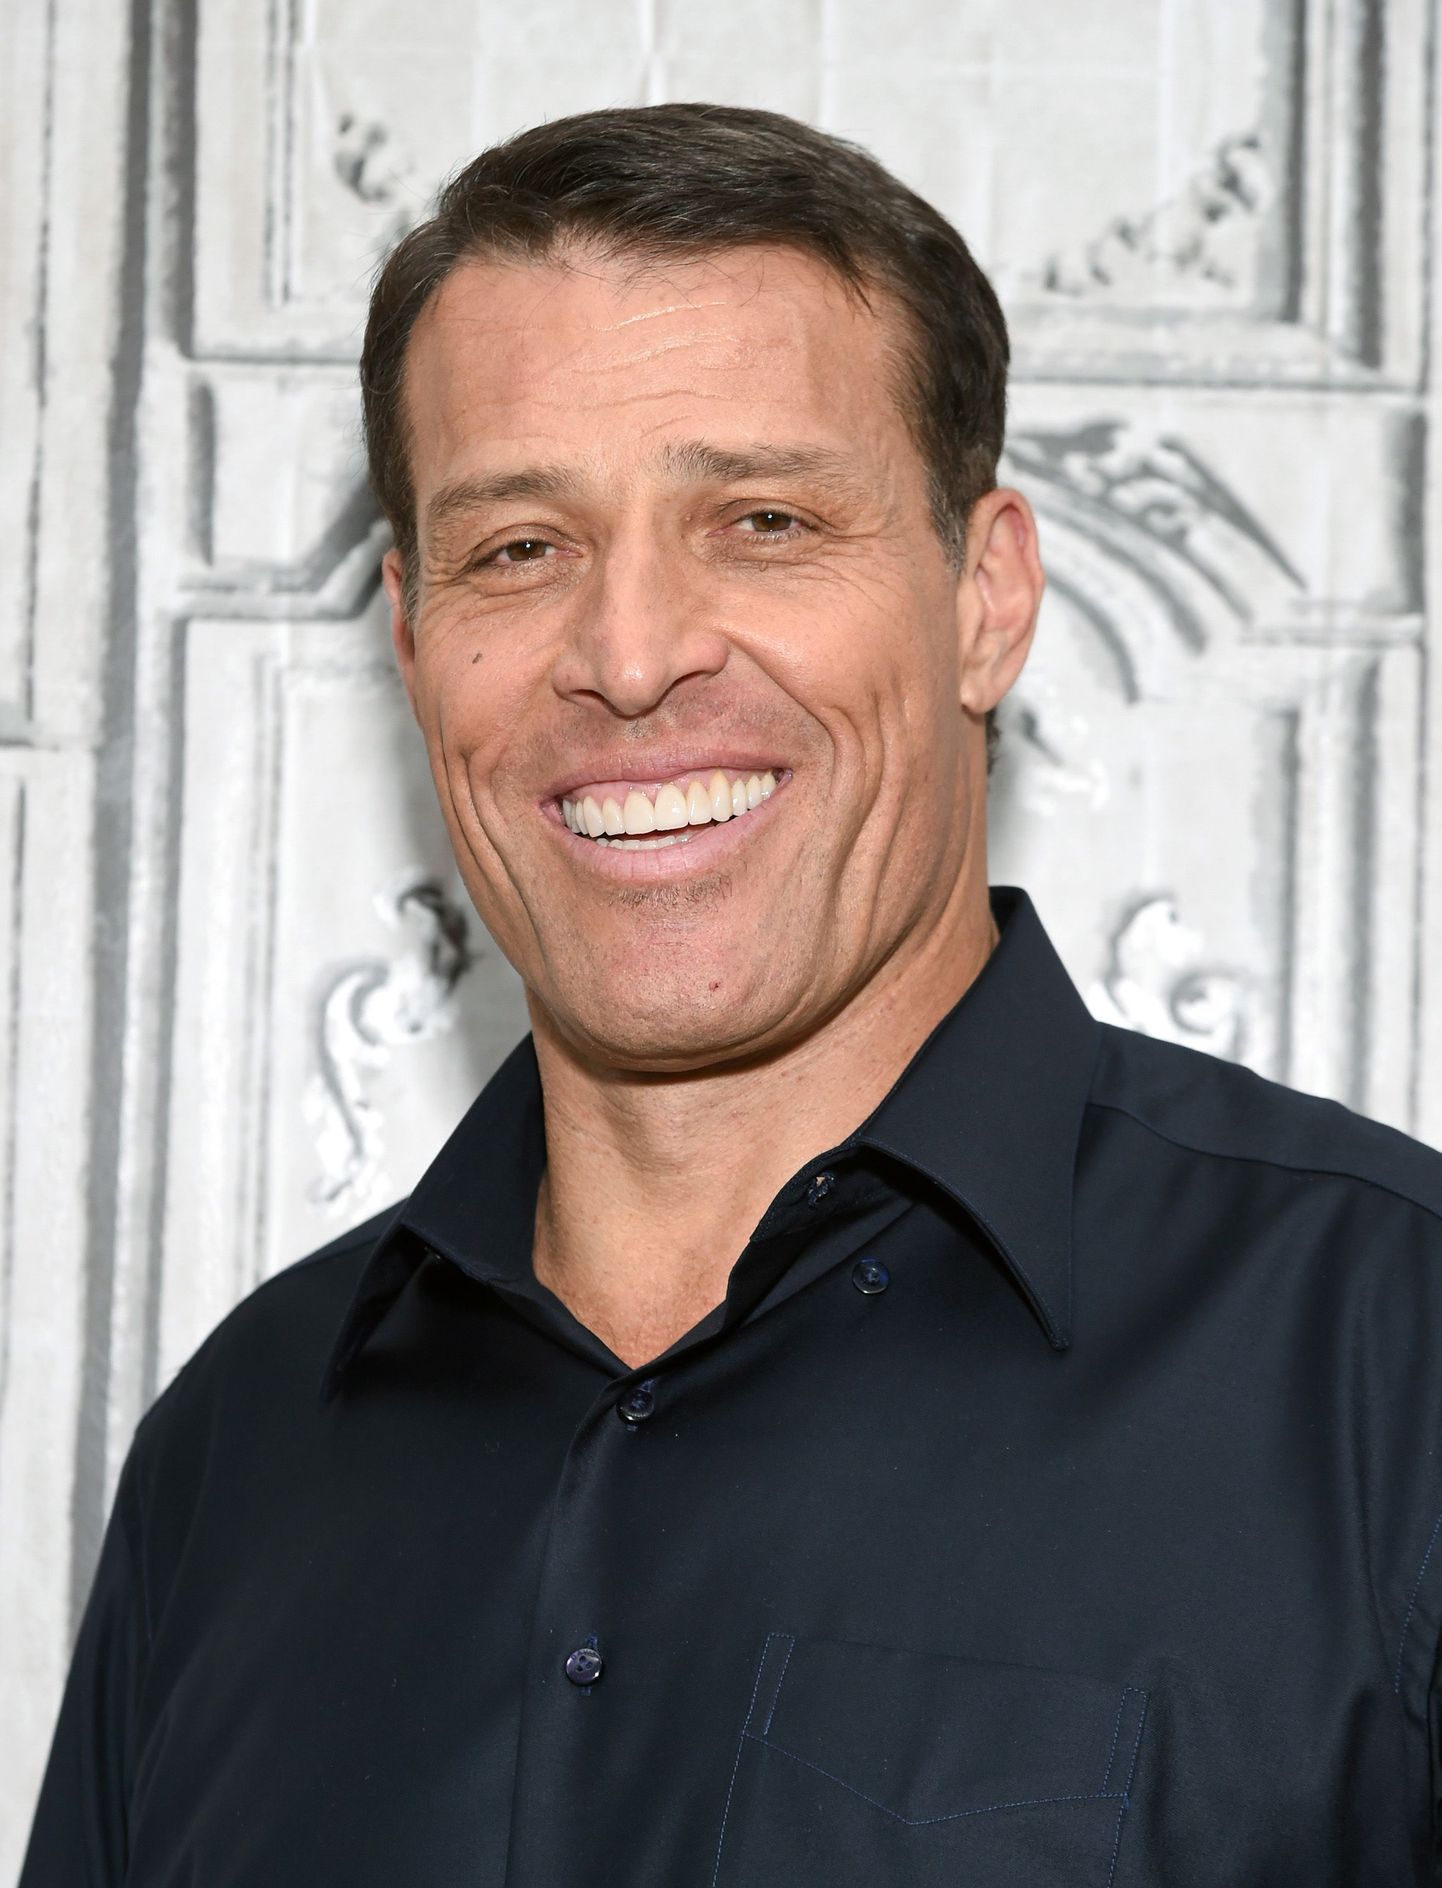 Life and business strategist Tony Robbins participates in AOL's BUILD Speaker Series to discuss the documentary, "I Am Not Your Guru", at AOL Studios on Monday, July 11, 2016, in New York. (Photo by Evan Agostini/Invision/AP)